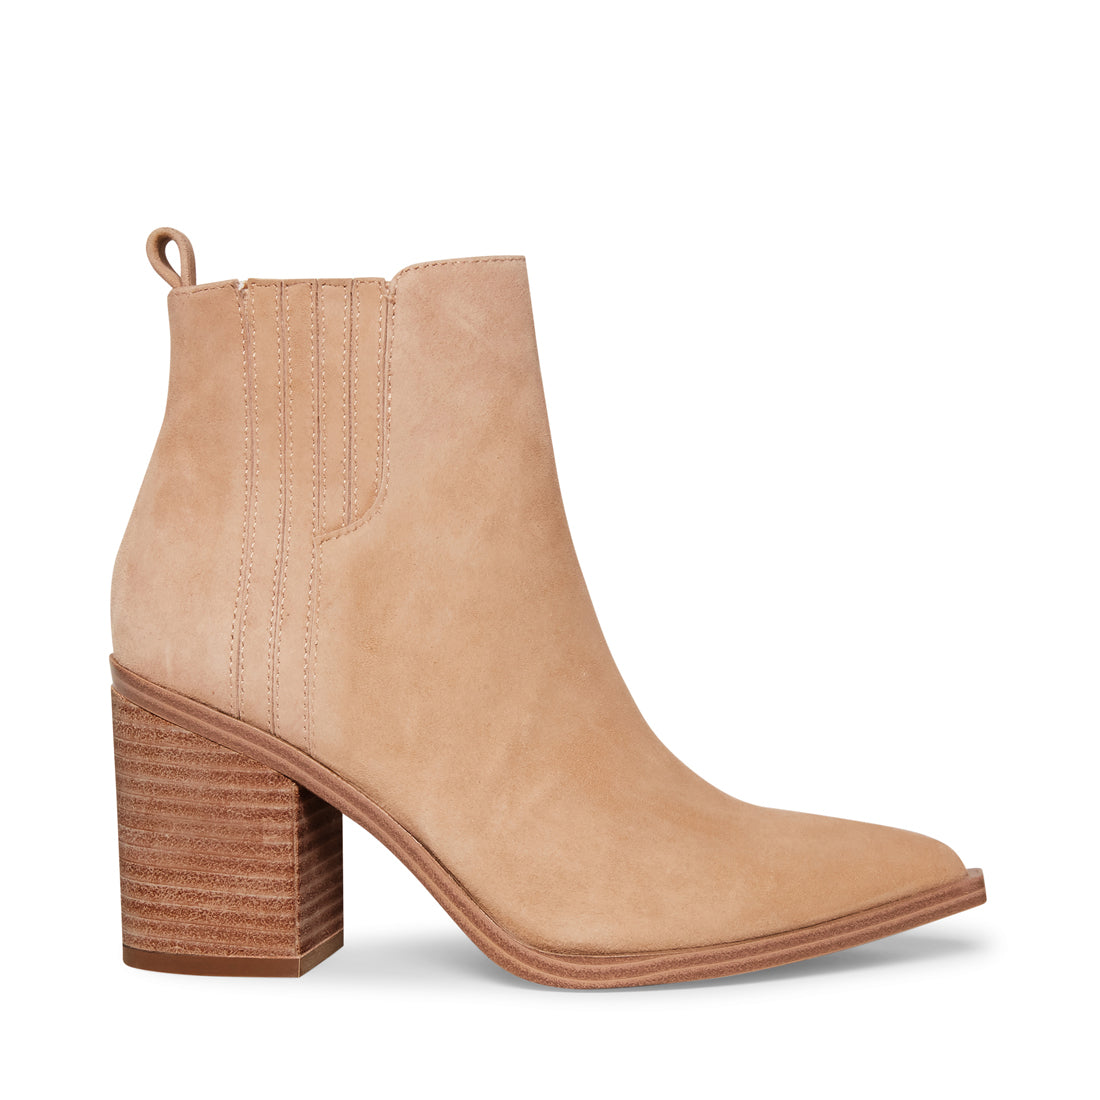 lord and taylor steve madden booties